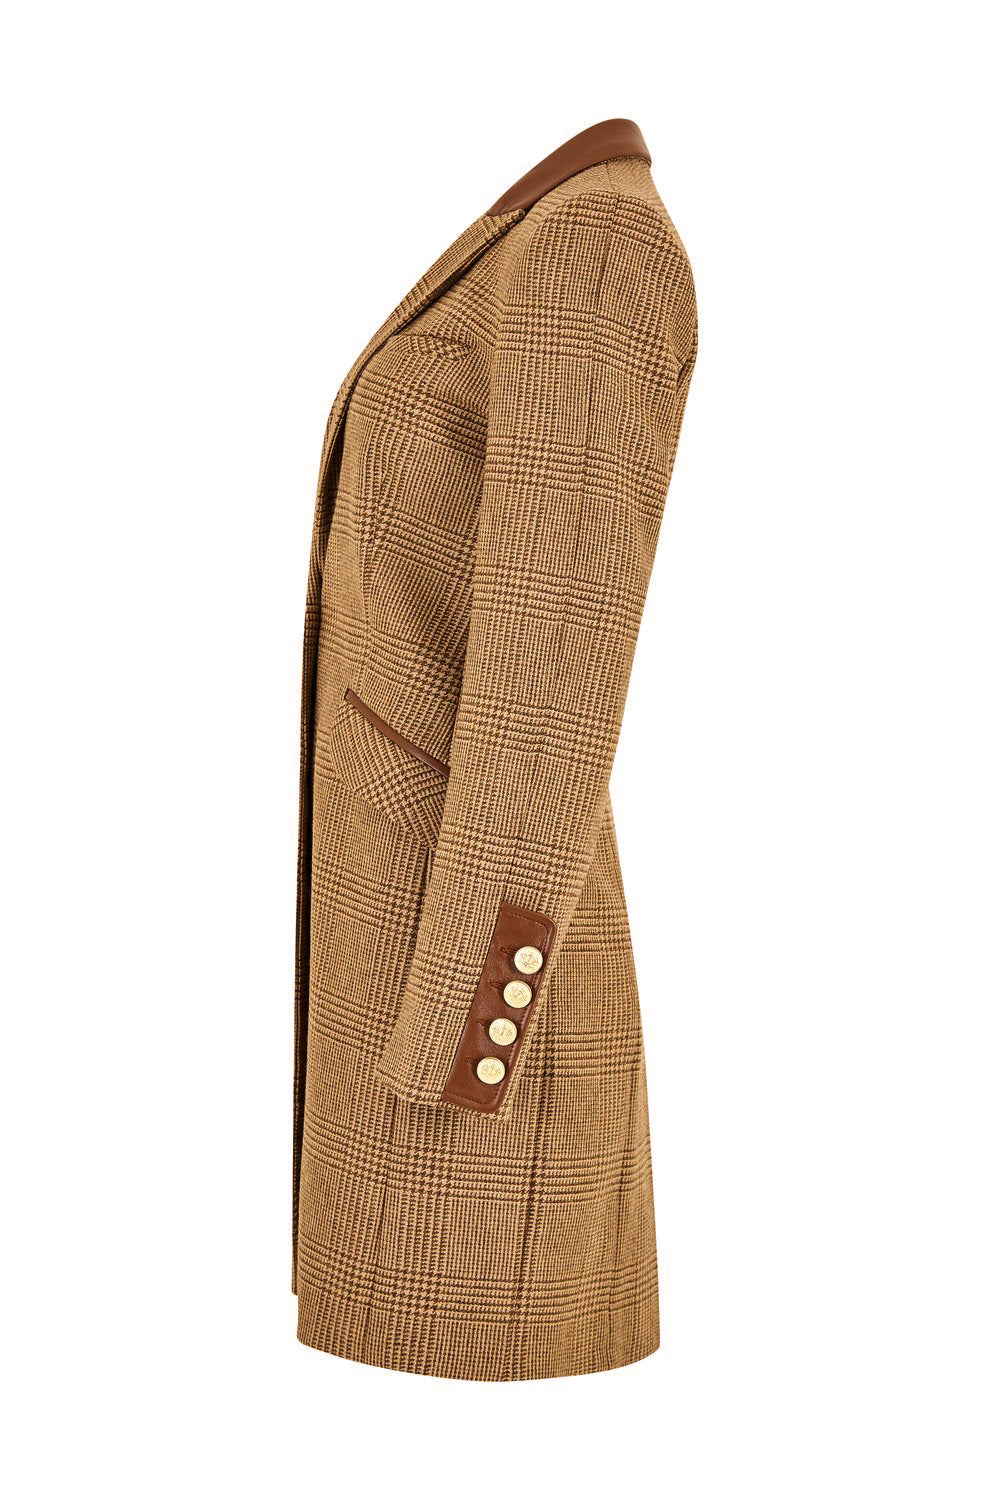 side of tan brown tweed womens coat with gold hardware and brown suede detailing